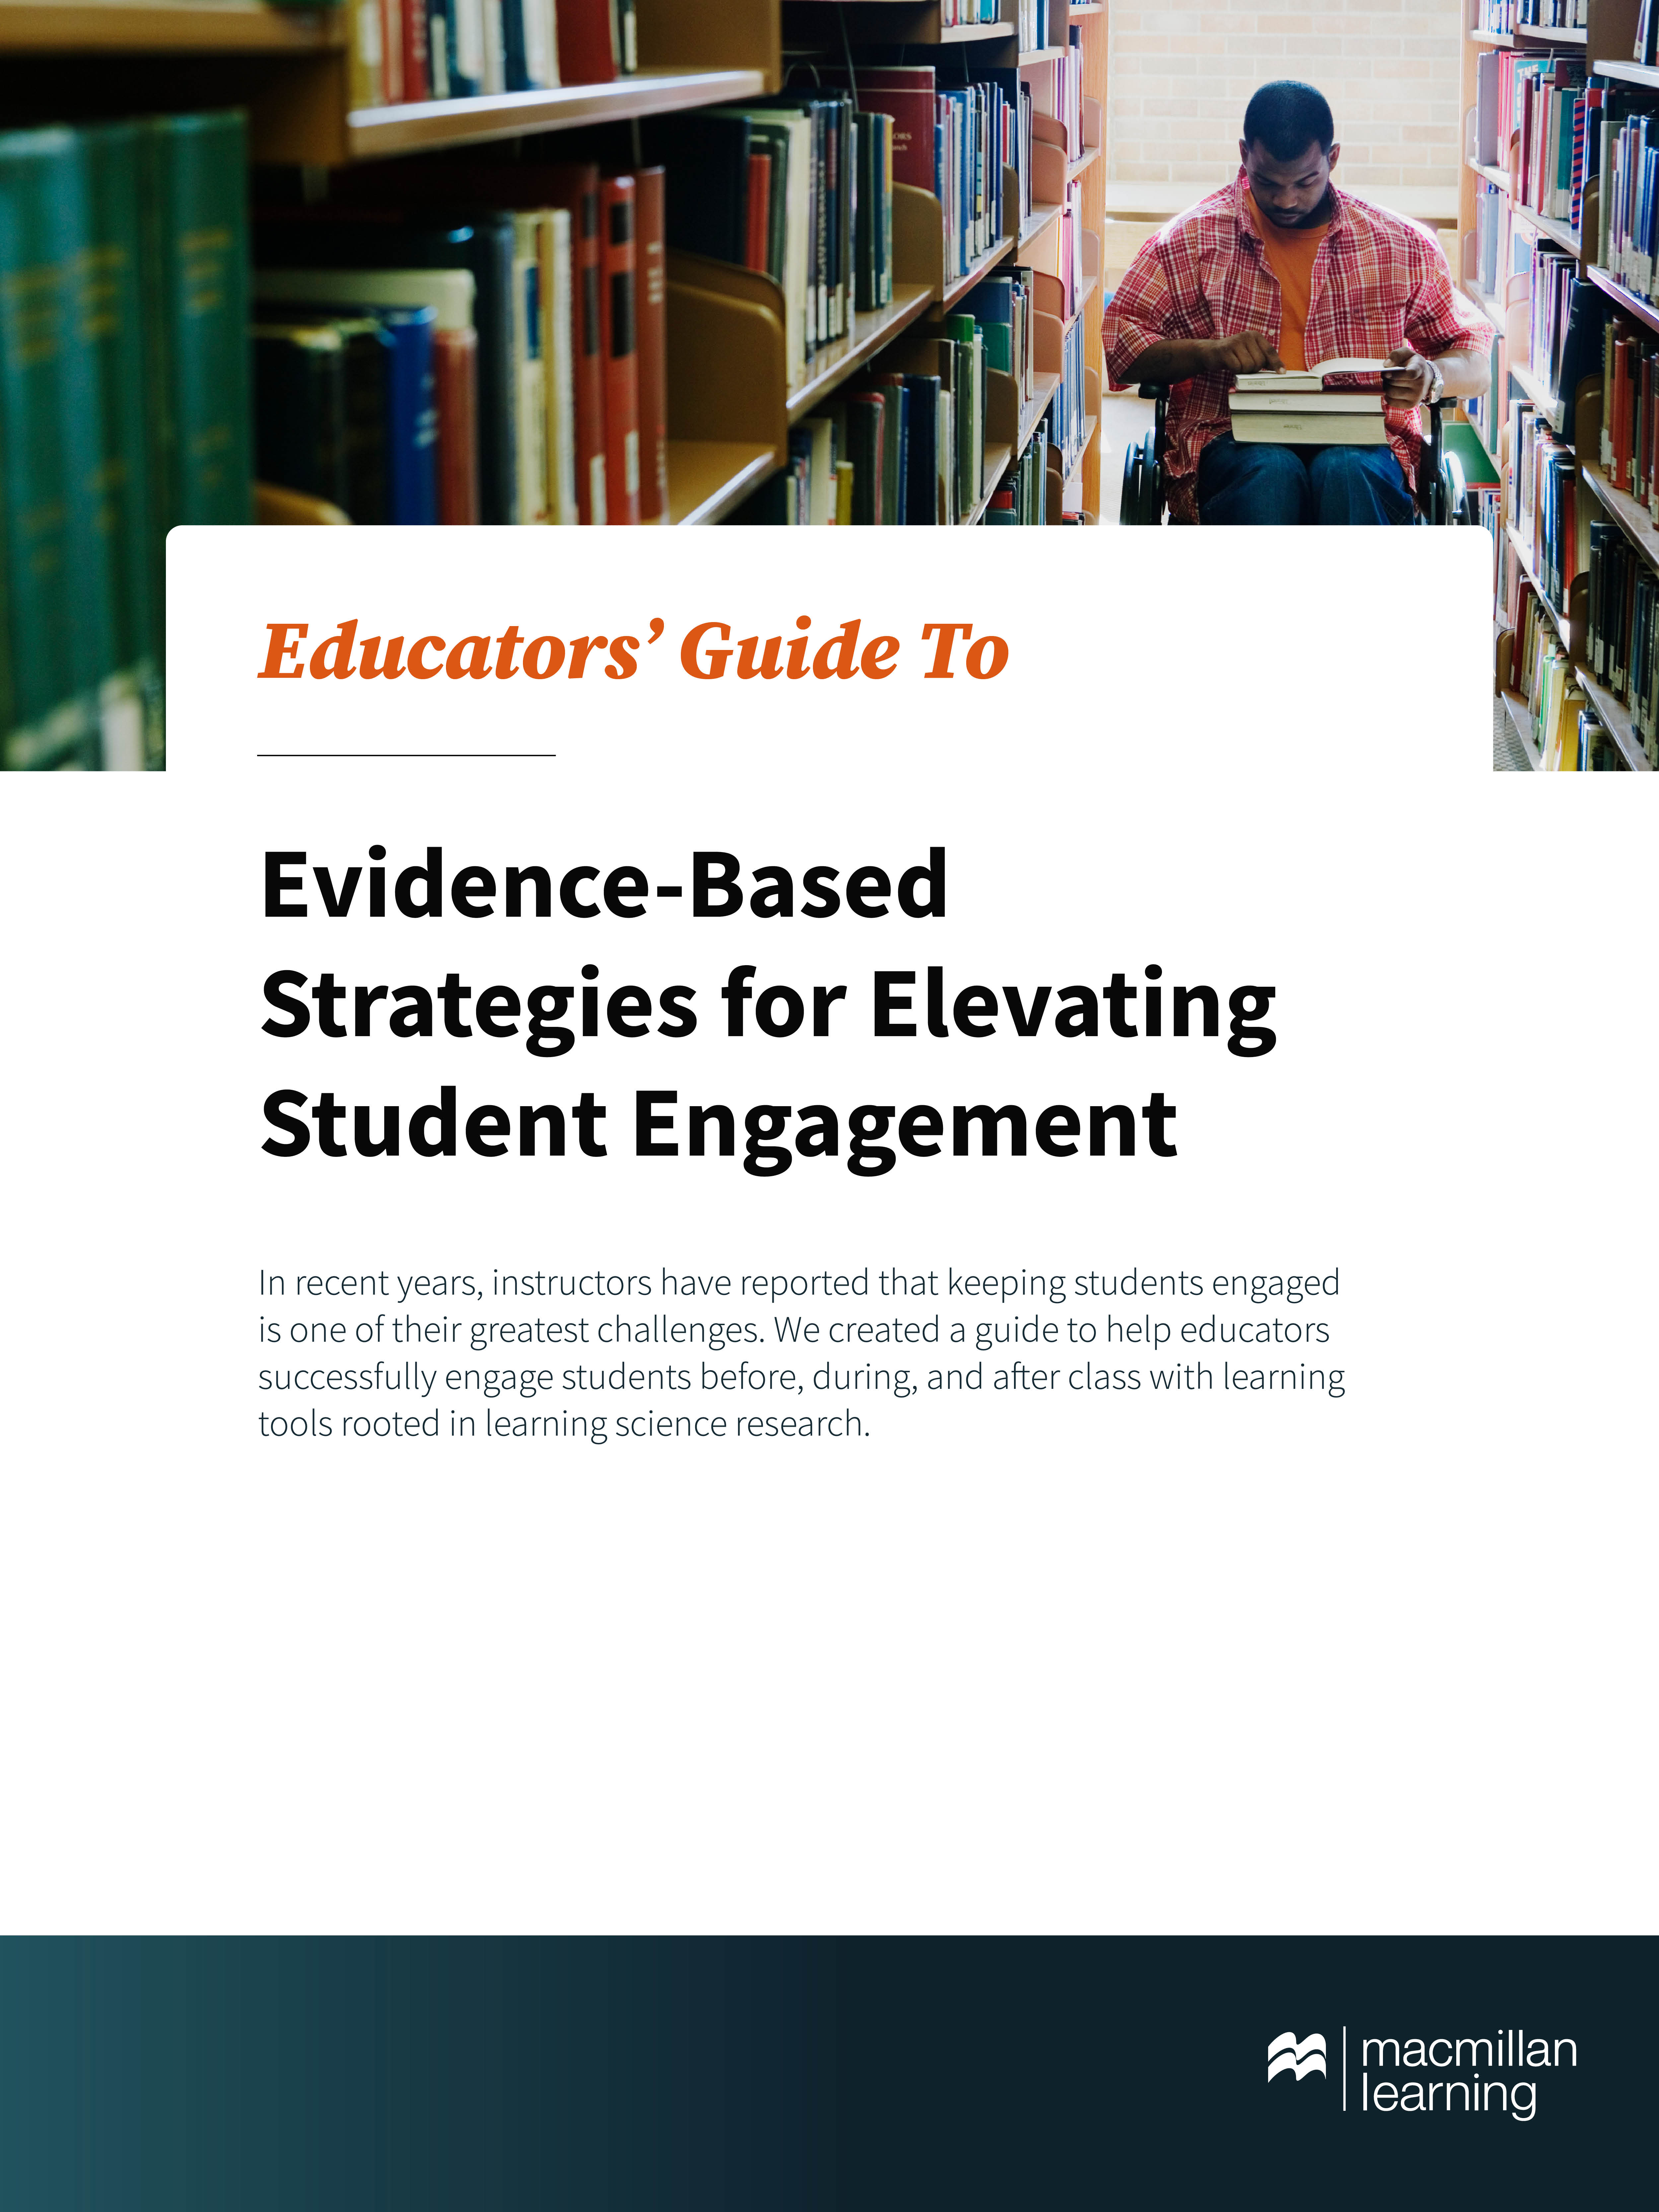 Educators’ Guide To Evidence-Based Strategies for Elevating Student Engagement